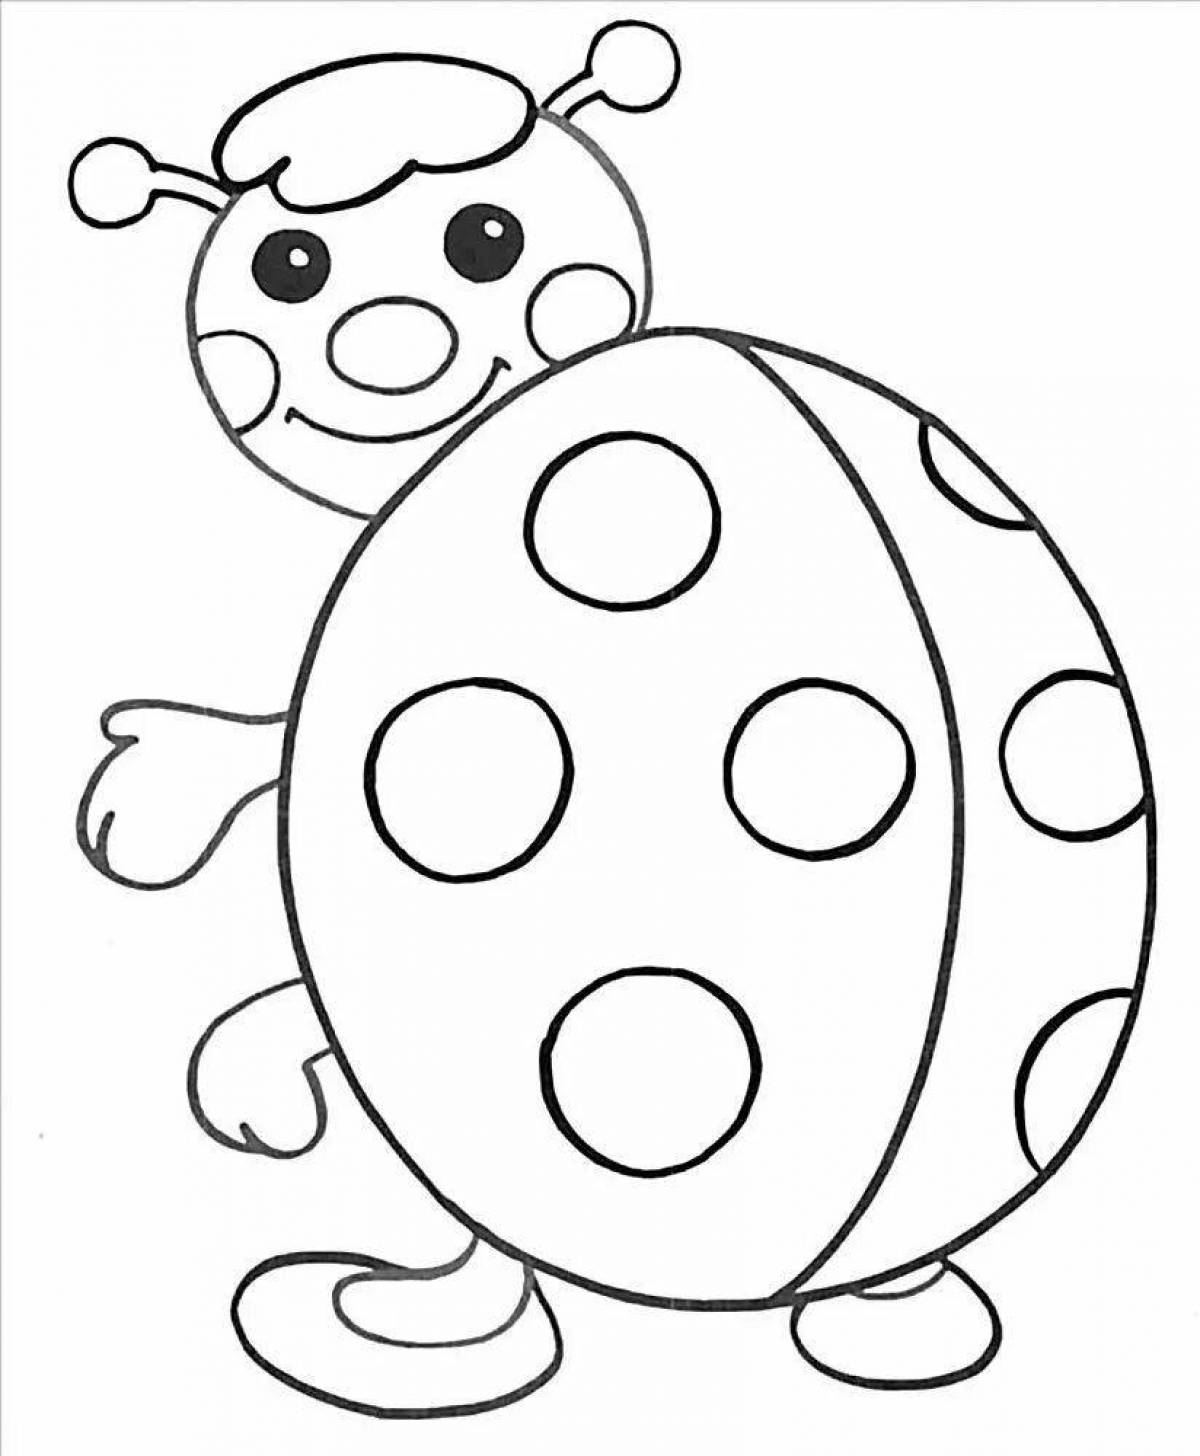 Bright coloring page 3 4